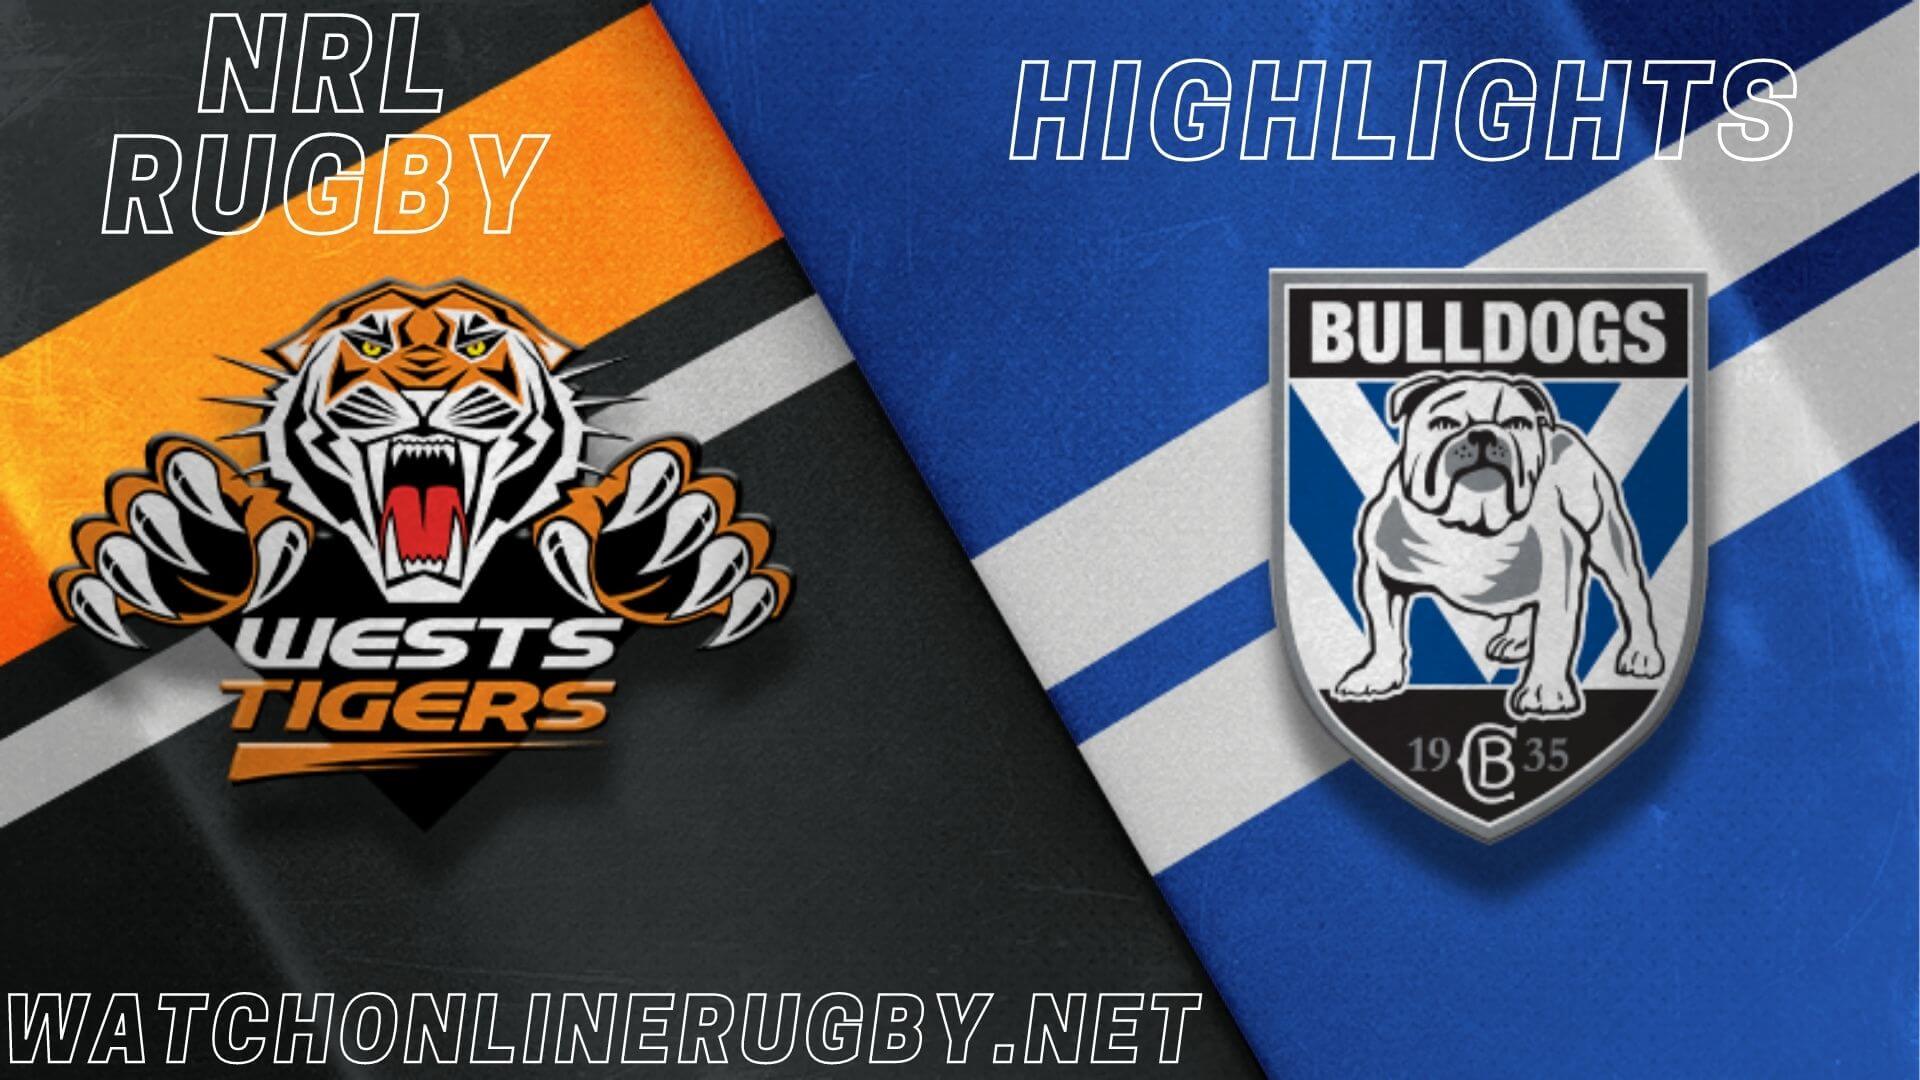 Bulldogs Vs Wests Tigers Highlights RD 15 NRL Rugby